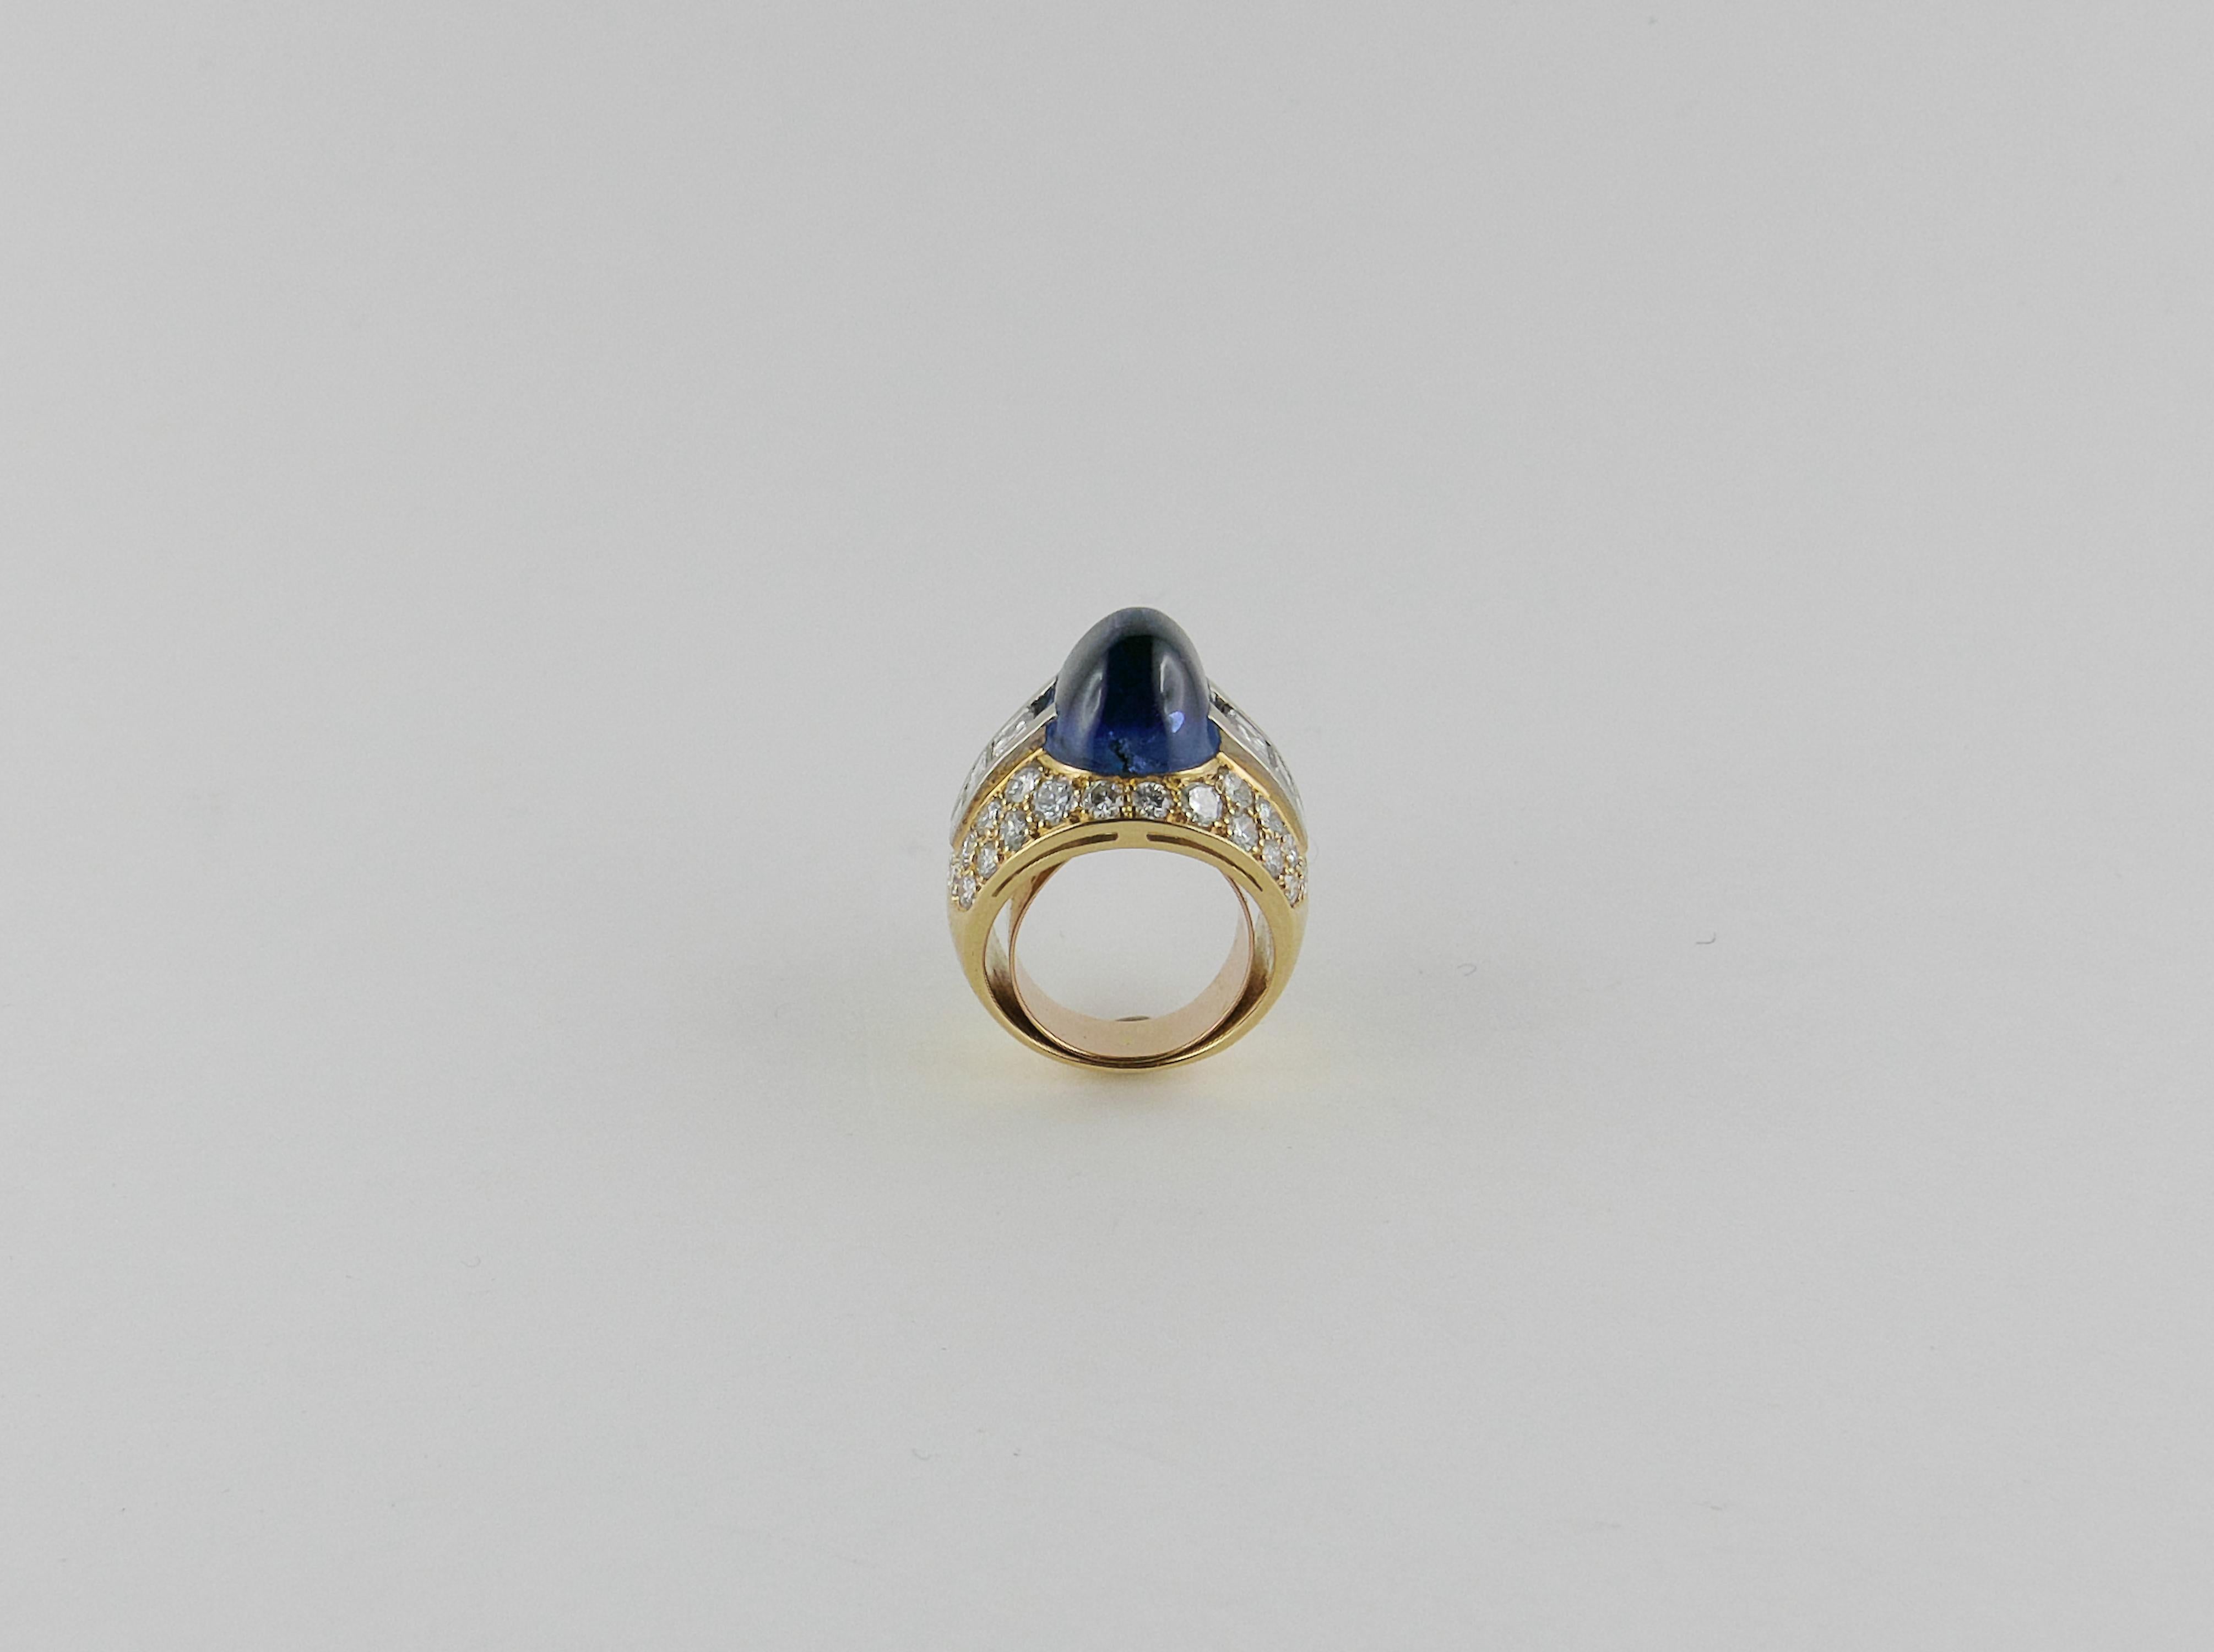 Extremely elegant geometric Ring finely crafted in Italy in 1970s  in rich 18 karat polished Yellow Gold  featuring a splendid central sugar loaf-cut intense blue Ceylon Sapphire no heat of 11.83 cts total weight, enlighted with approx. 2.5 cts. of